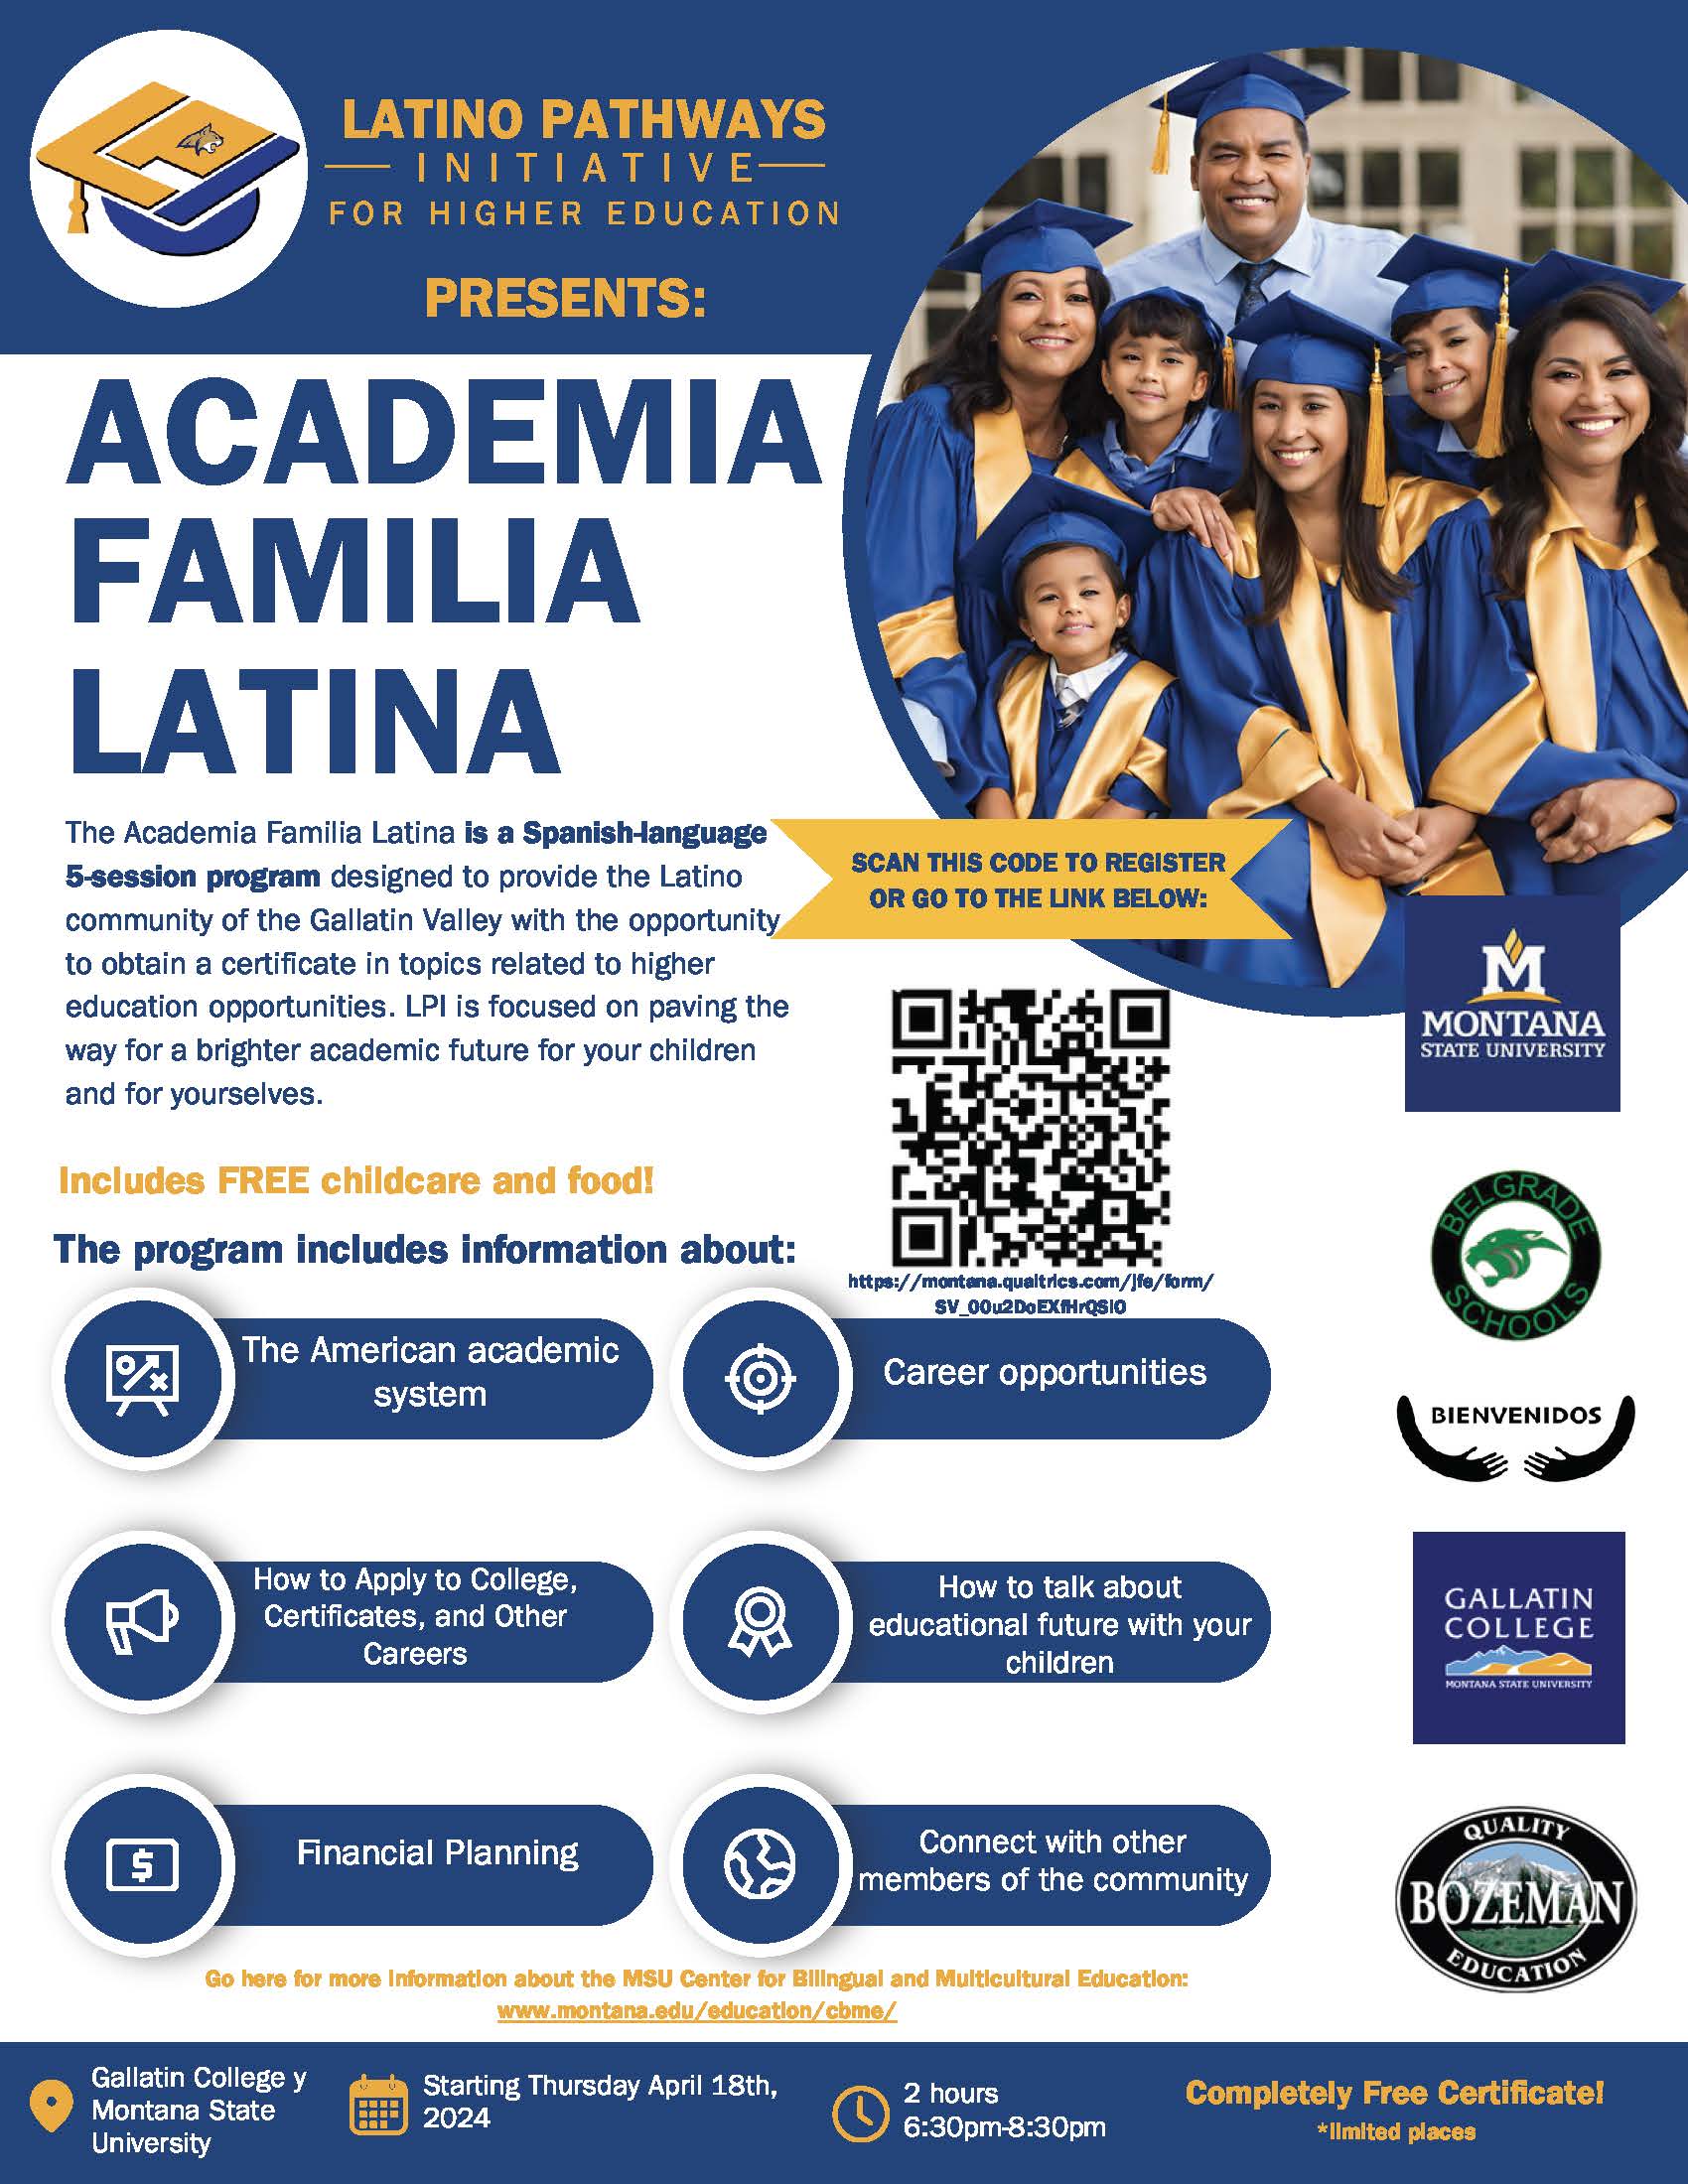 The Academia Familia Latina is a Spanish-language 5-session program designed to provide the Latino community of the Gallatin Valley with the opportunity to obtain a certificate in topics relatd to higher education opportunities.